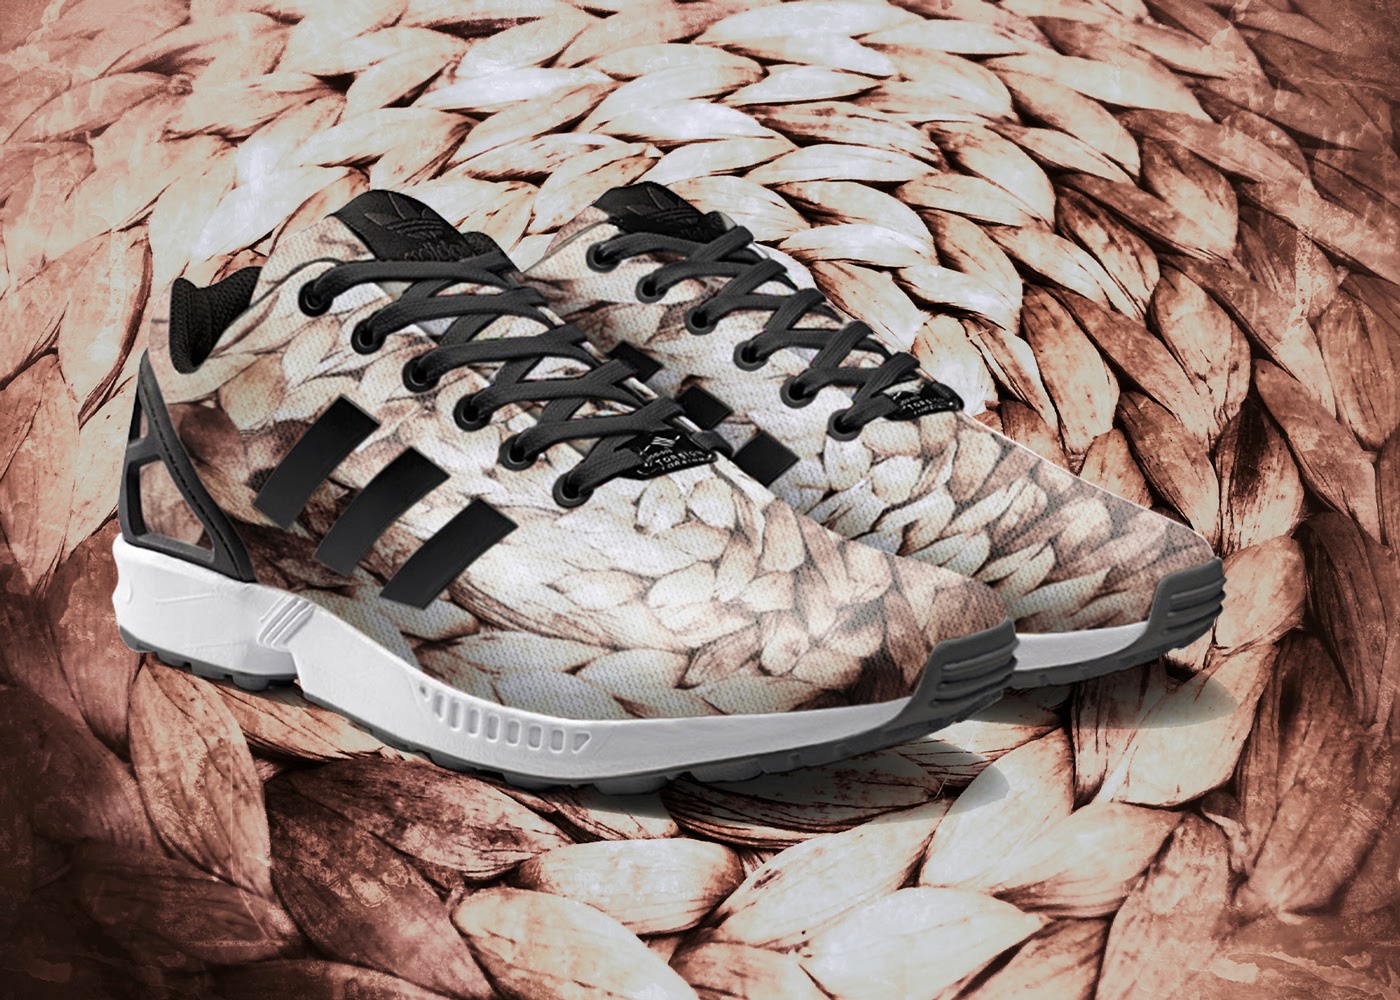 06-mi-Adidas-ZX-Flux-Shoe-App-to-Customise-your-Shoes-www-designstack-co